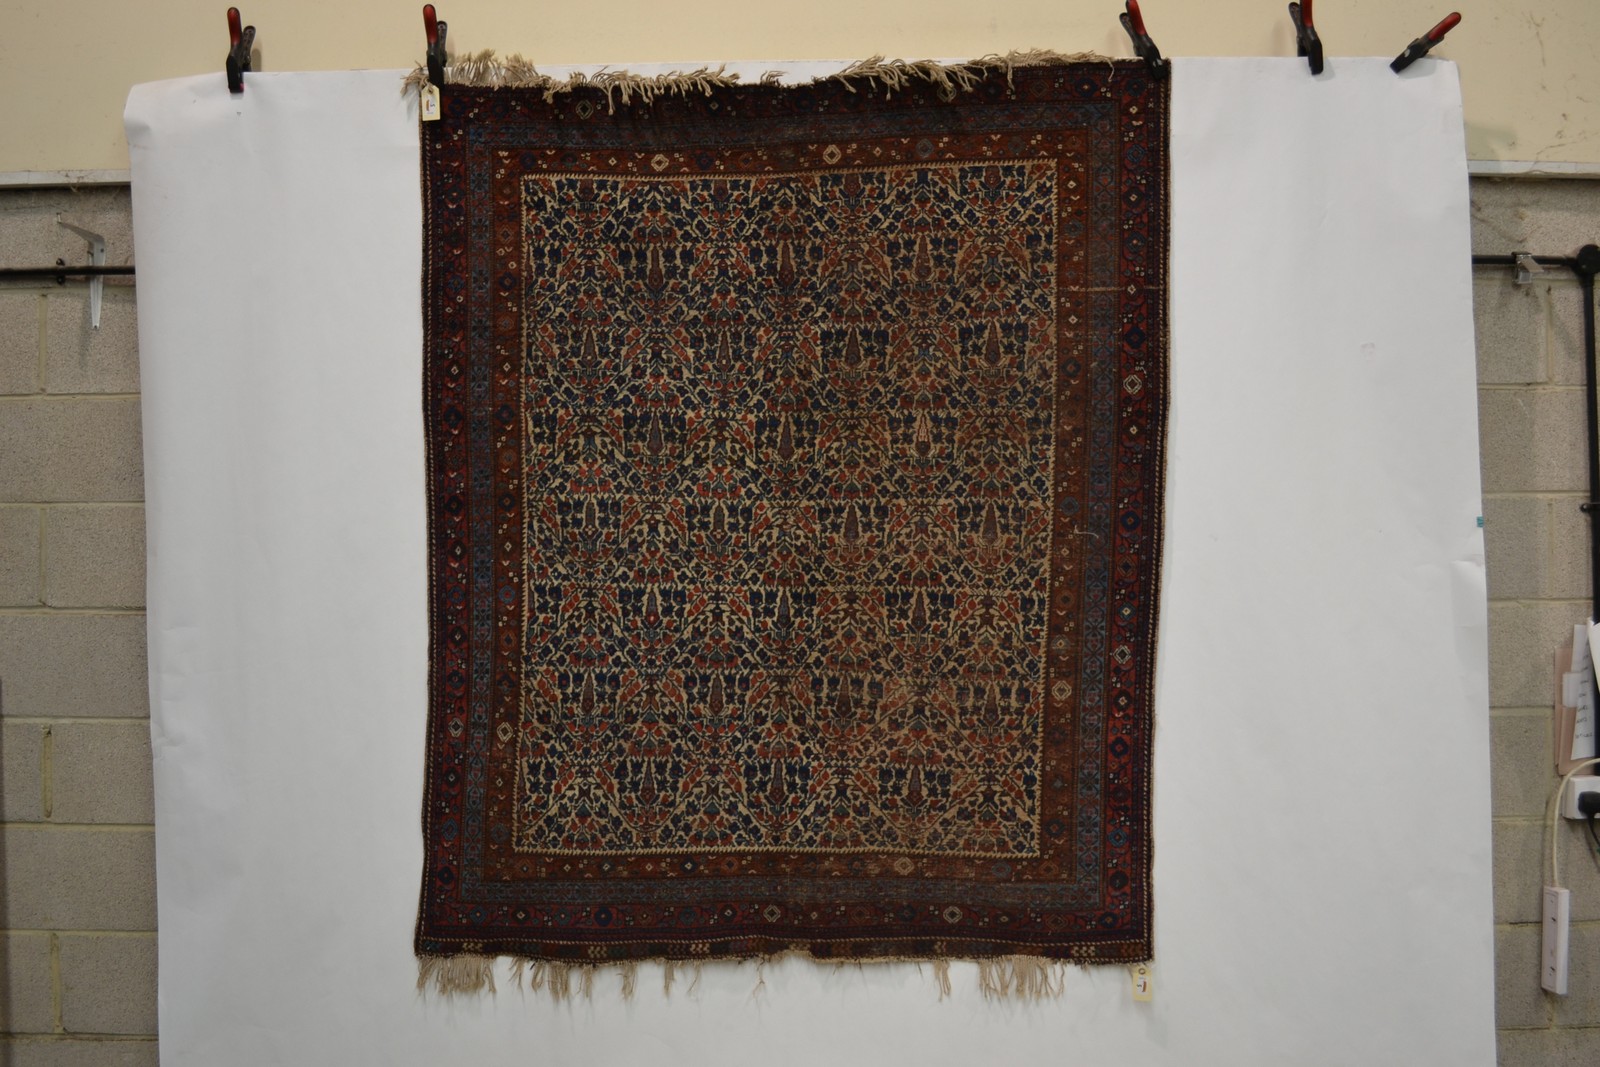 Neiriz rug, Fars, south west Persia, about 1930s, 5ft. 9in. x 4ft. 10in. 1.75m. x 1.47m. Overall